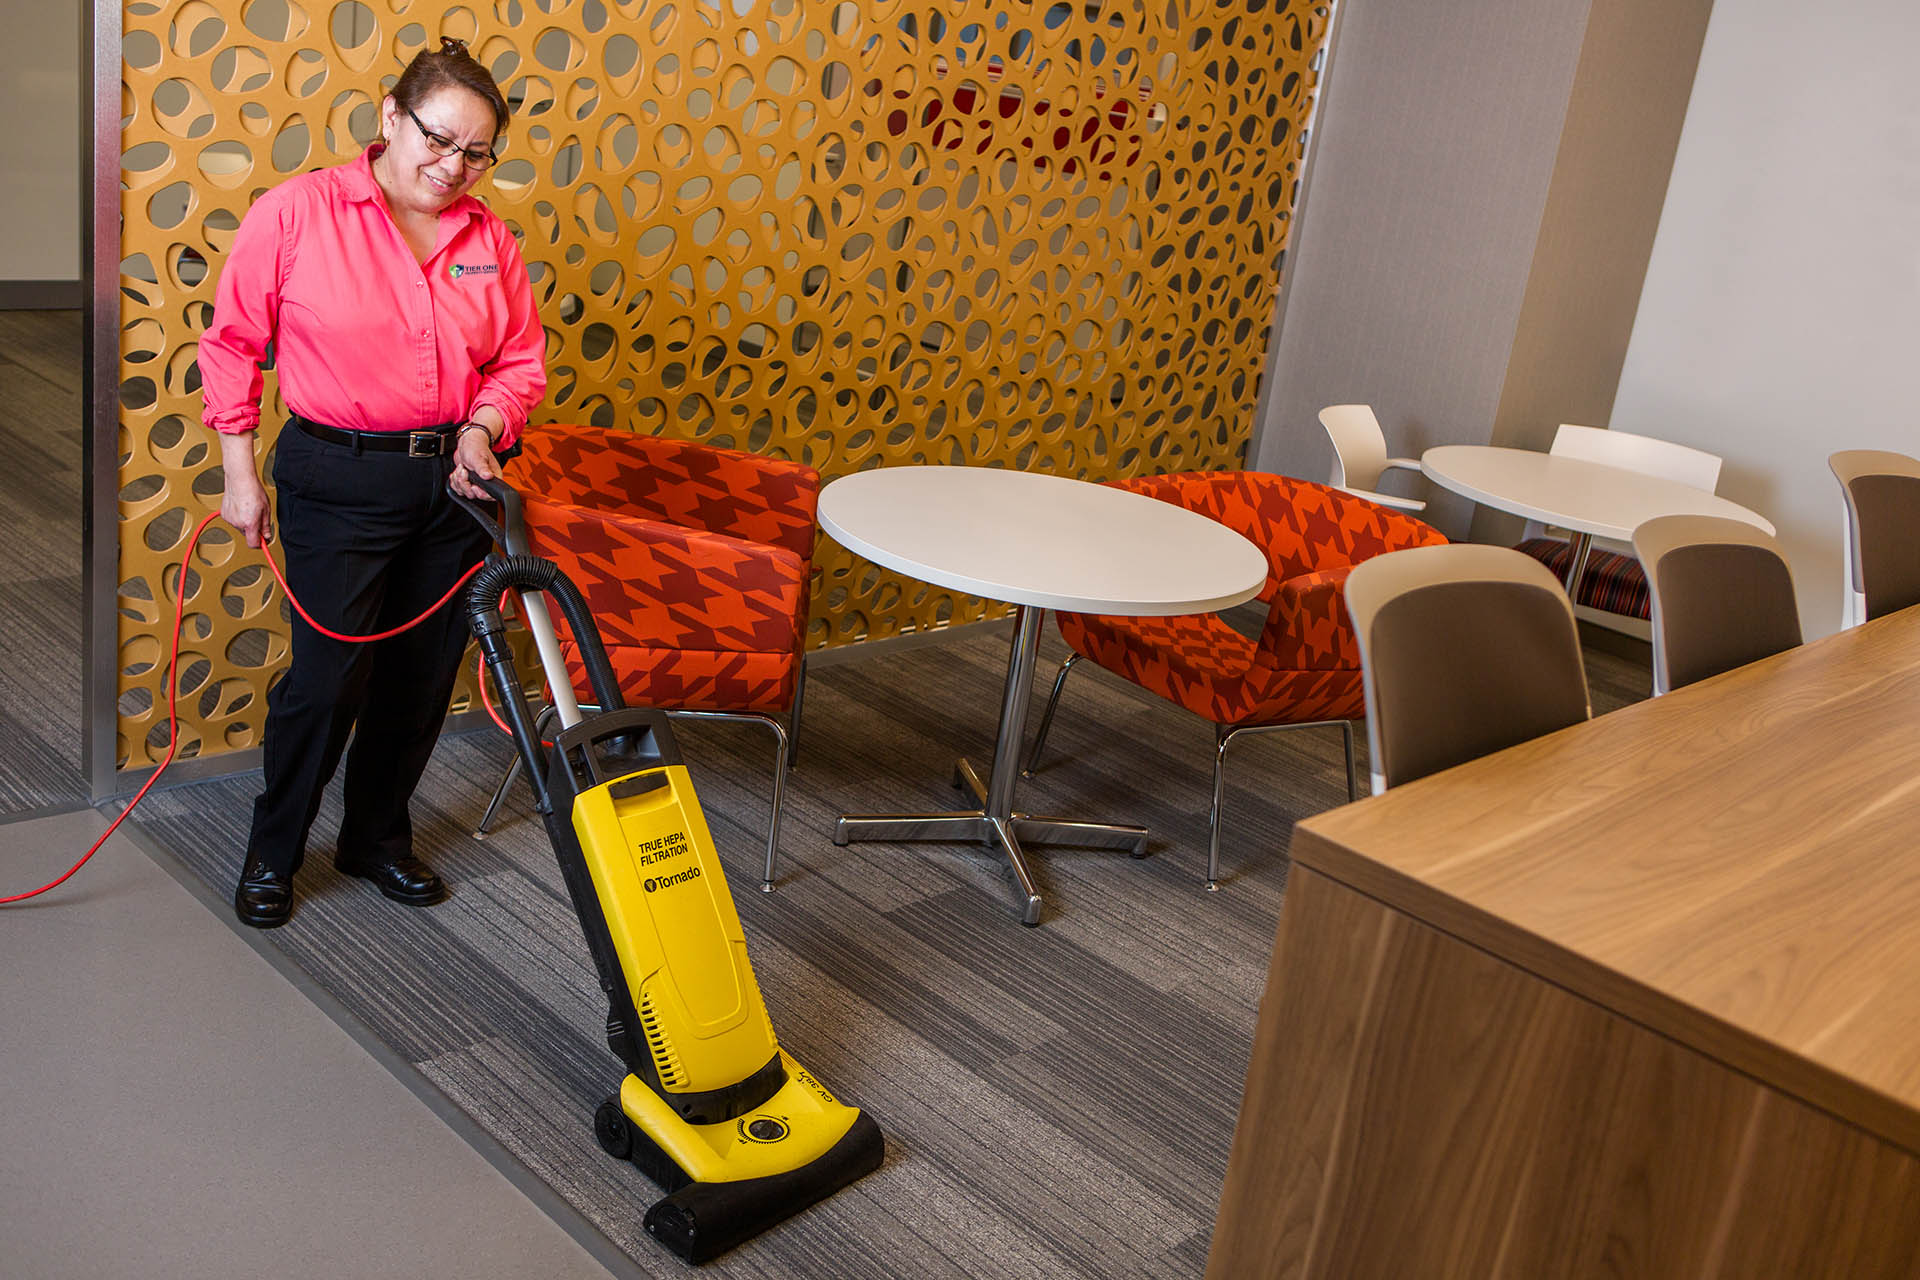 Tier One Property Services is a minority-owned facility services provider of commercial janitorial, building maintenance and specialty property services